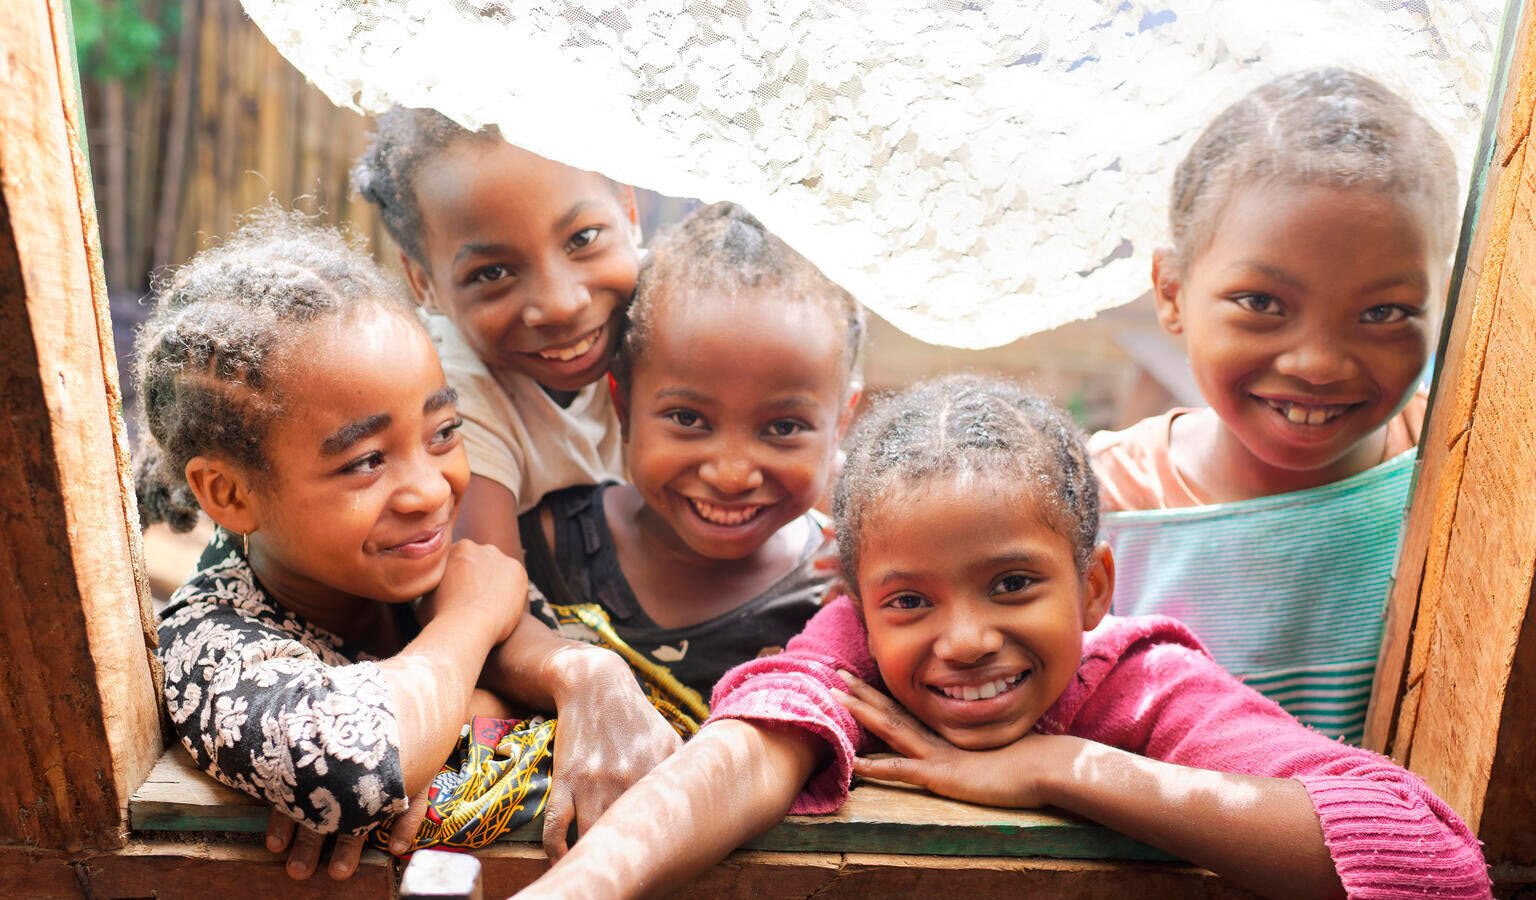 African children smiling in a window frame